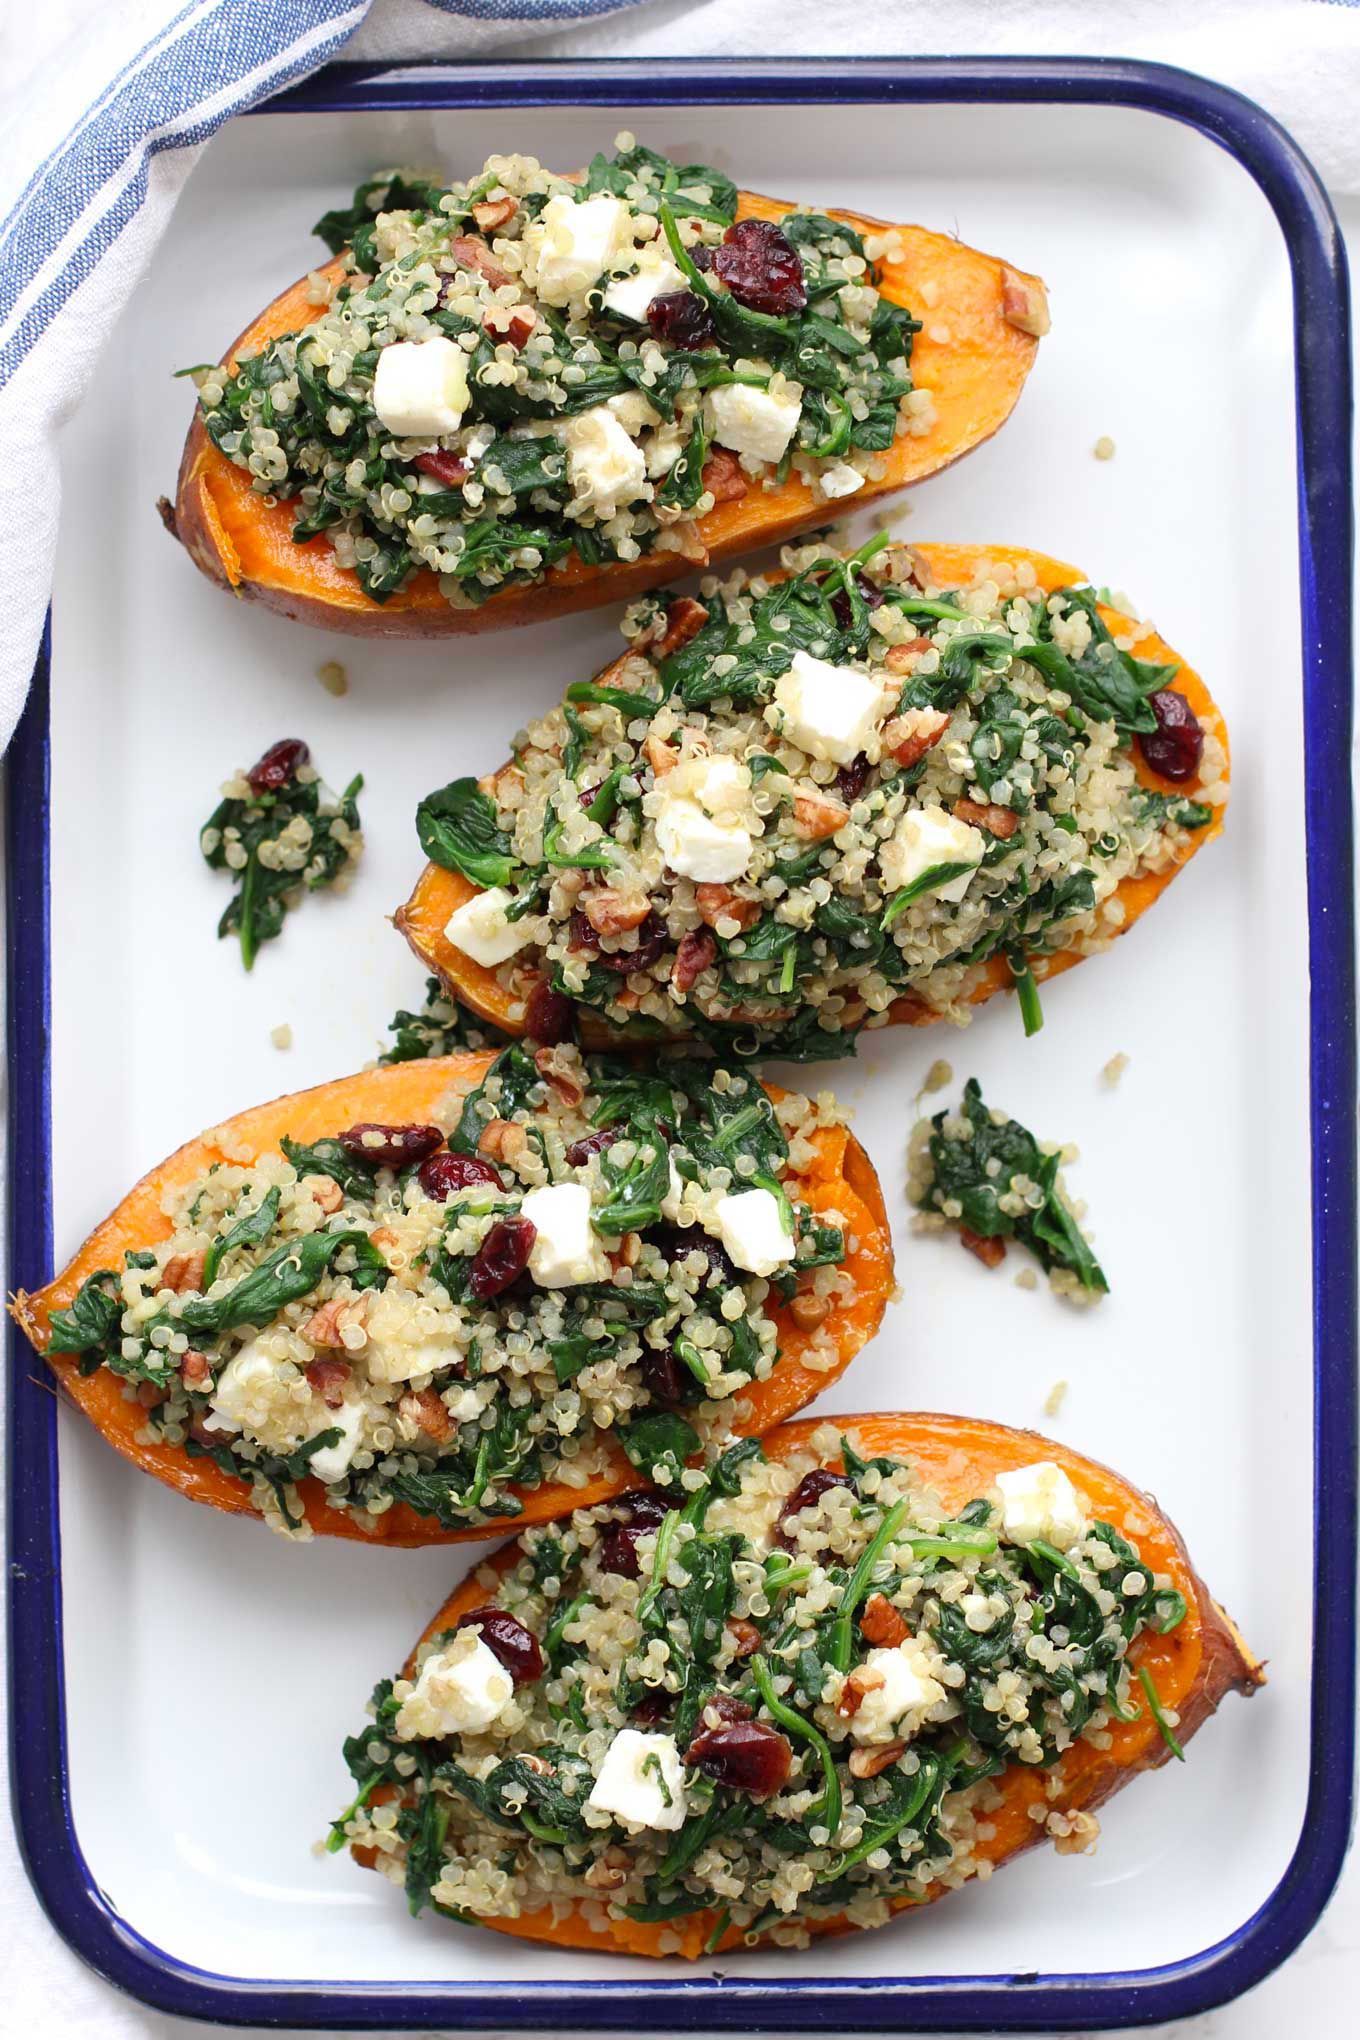 Roasted sweet potatoes stuffed with quinoa and spinach are a favorite fall dish. Its colorful, healthy and packed with flavor.